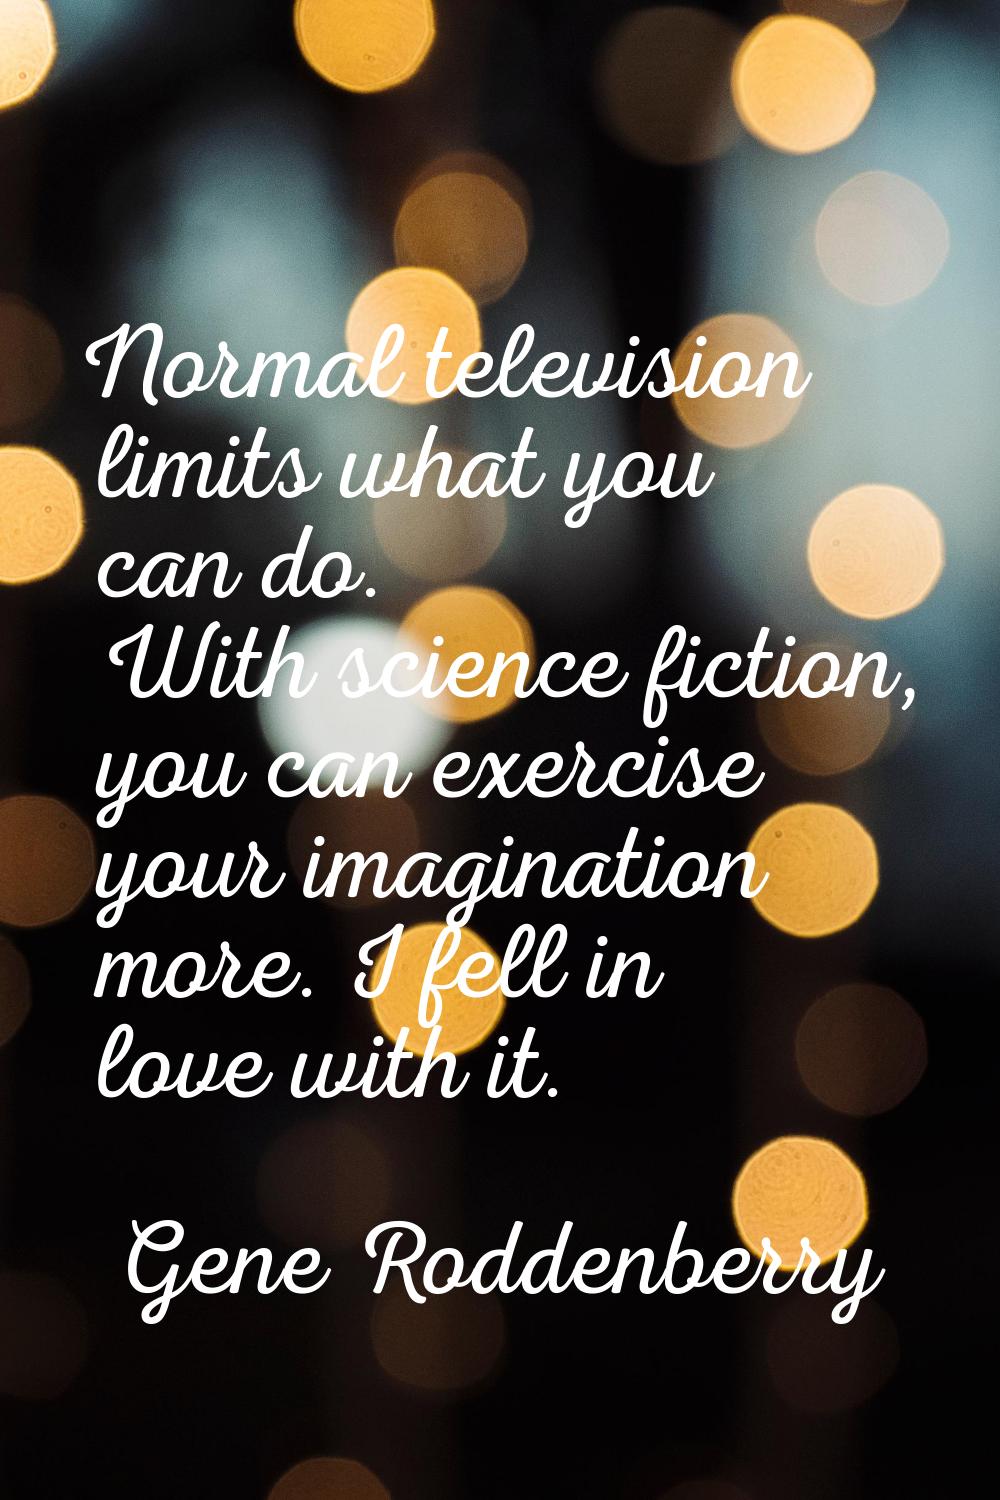 Normal television limits what you can do. With science fiction, you can exercise your imagination m